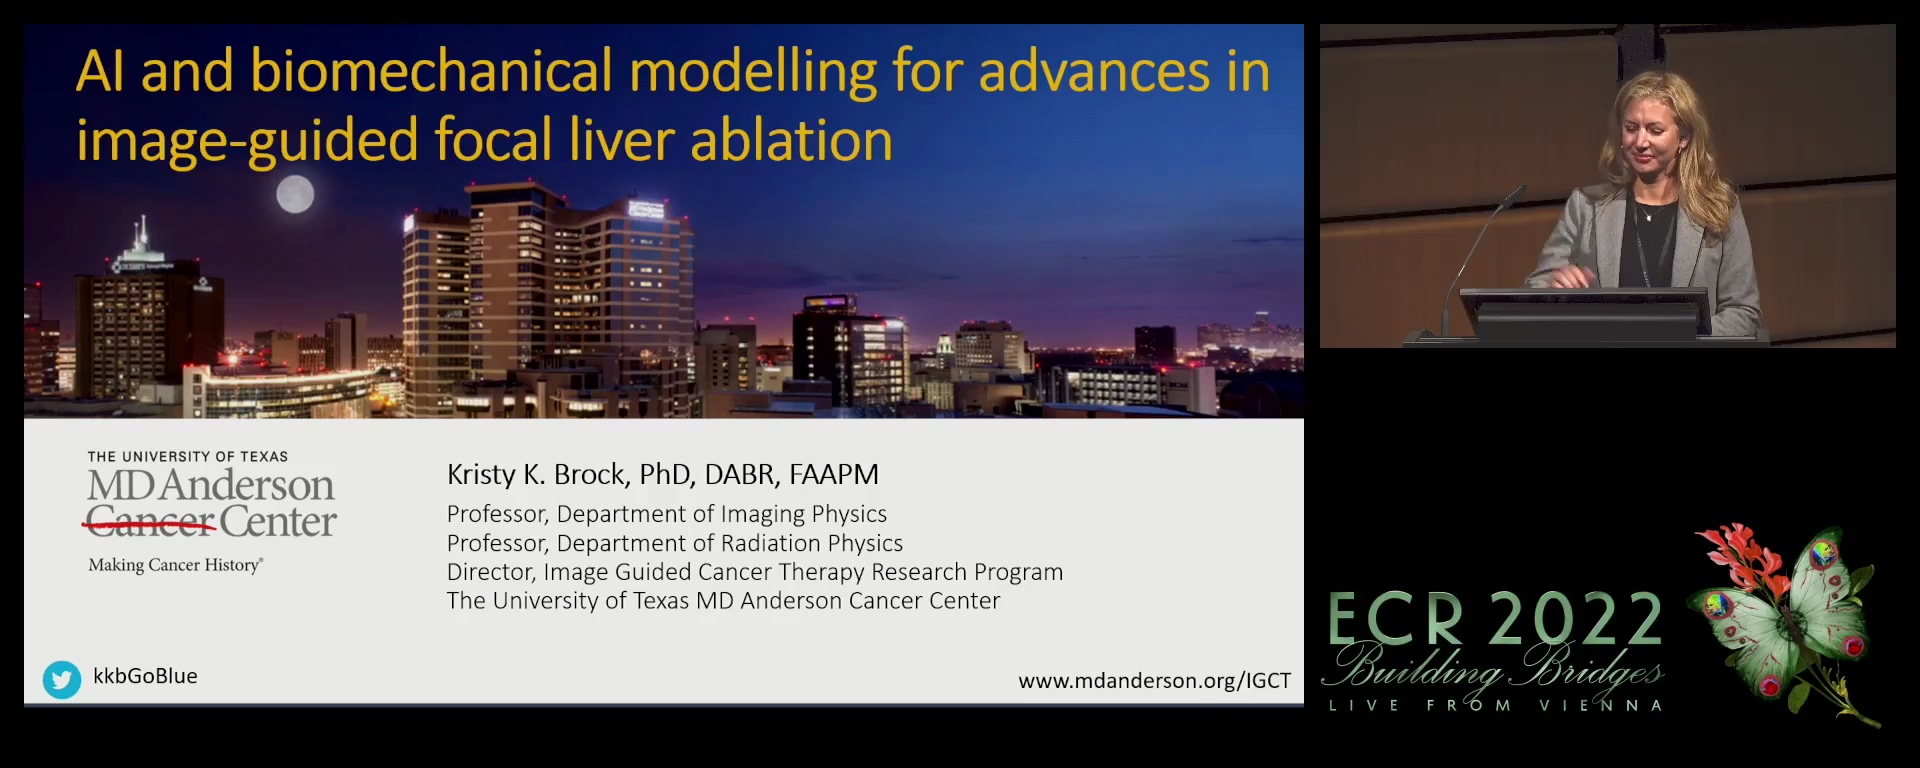 AI and biomechanical modelling for advances in image-guided focal liver ablation